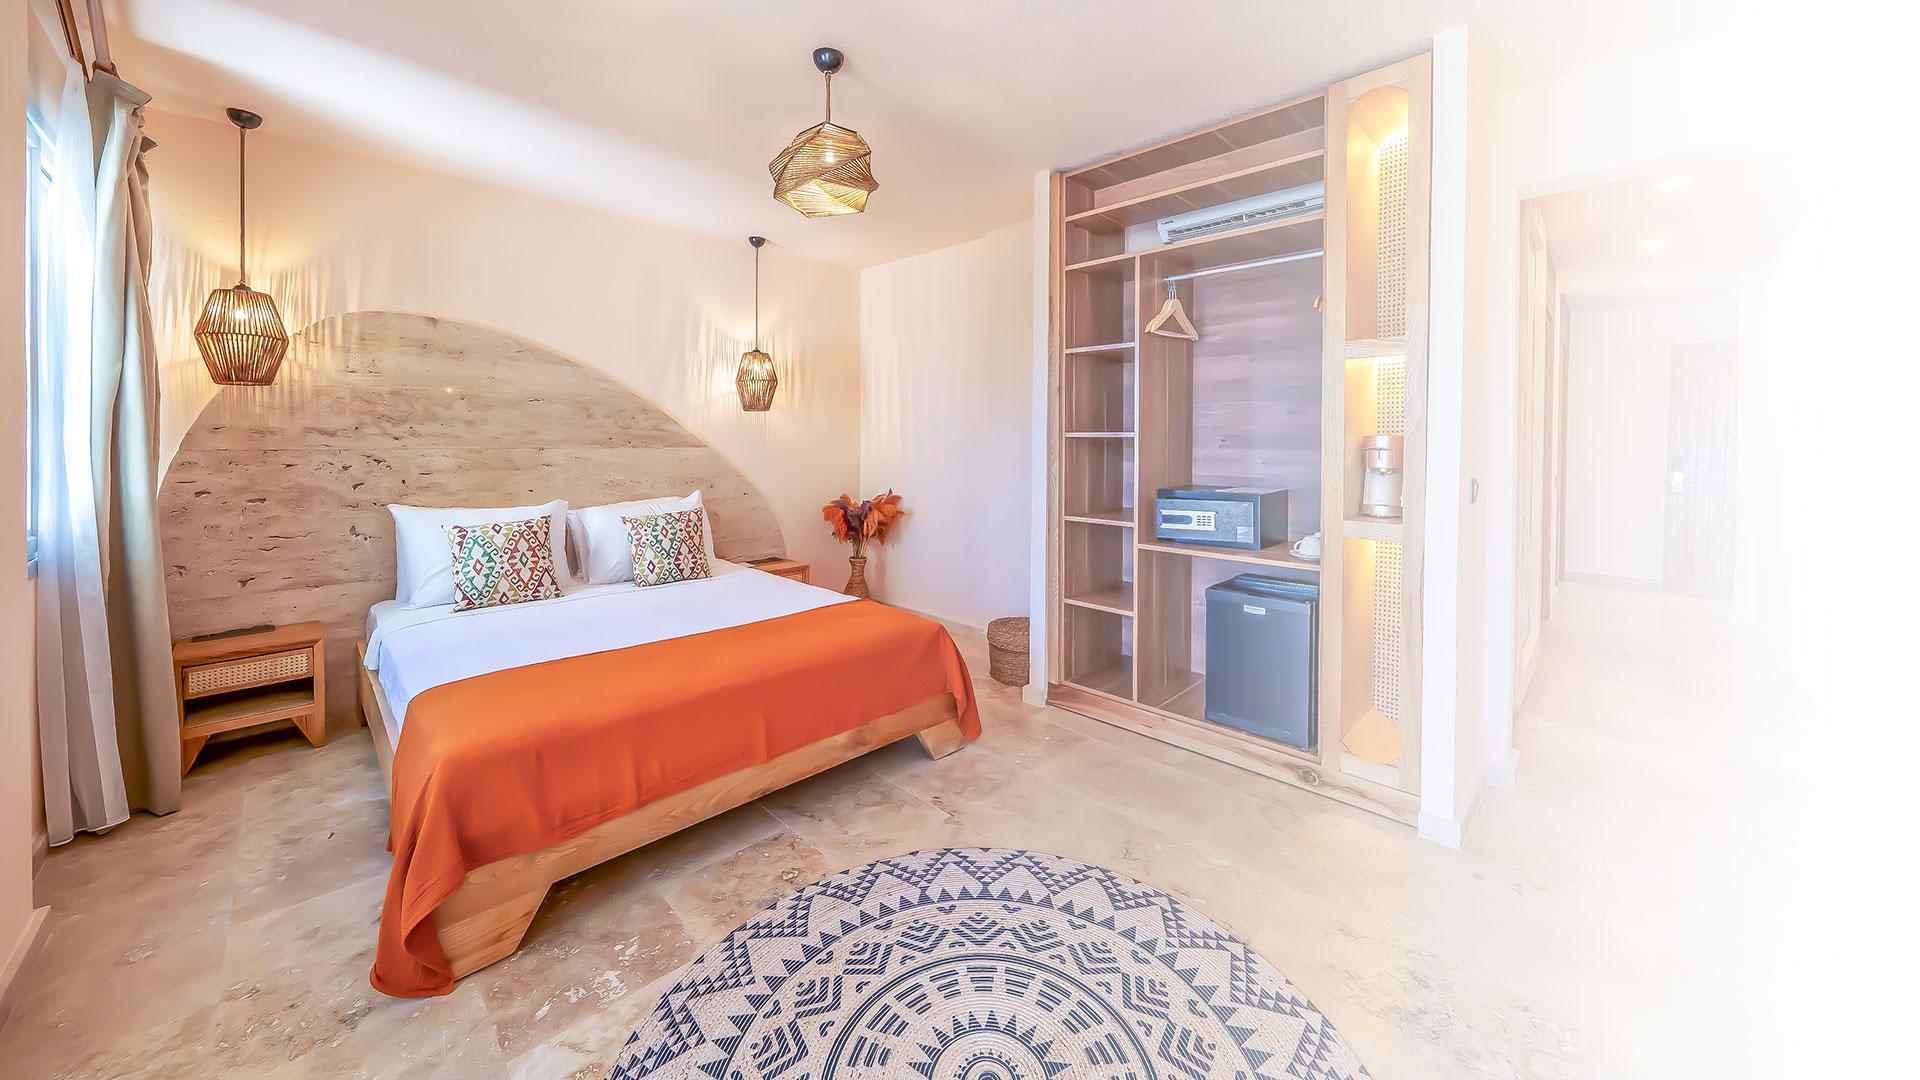 The Studio Room, with a total area of 40 m2, is an ideal option for solo travelers or couples who do not want to compromise on comfort while taking advantage of the hotel's amenities. This room also has an option for a sea view.